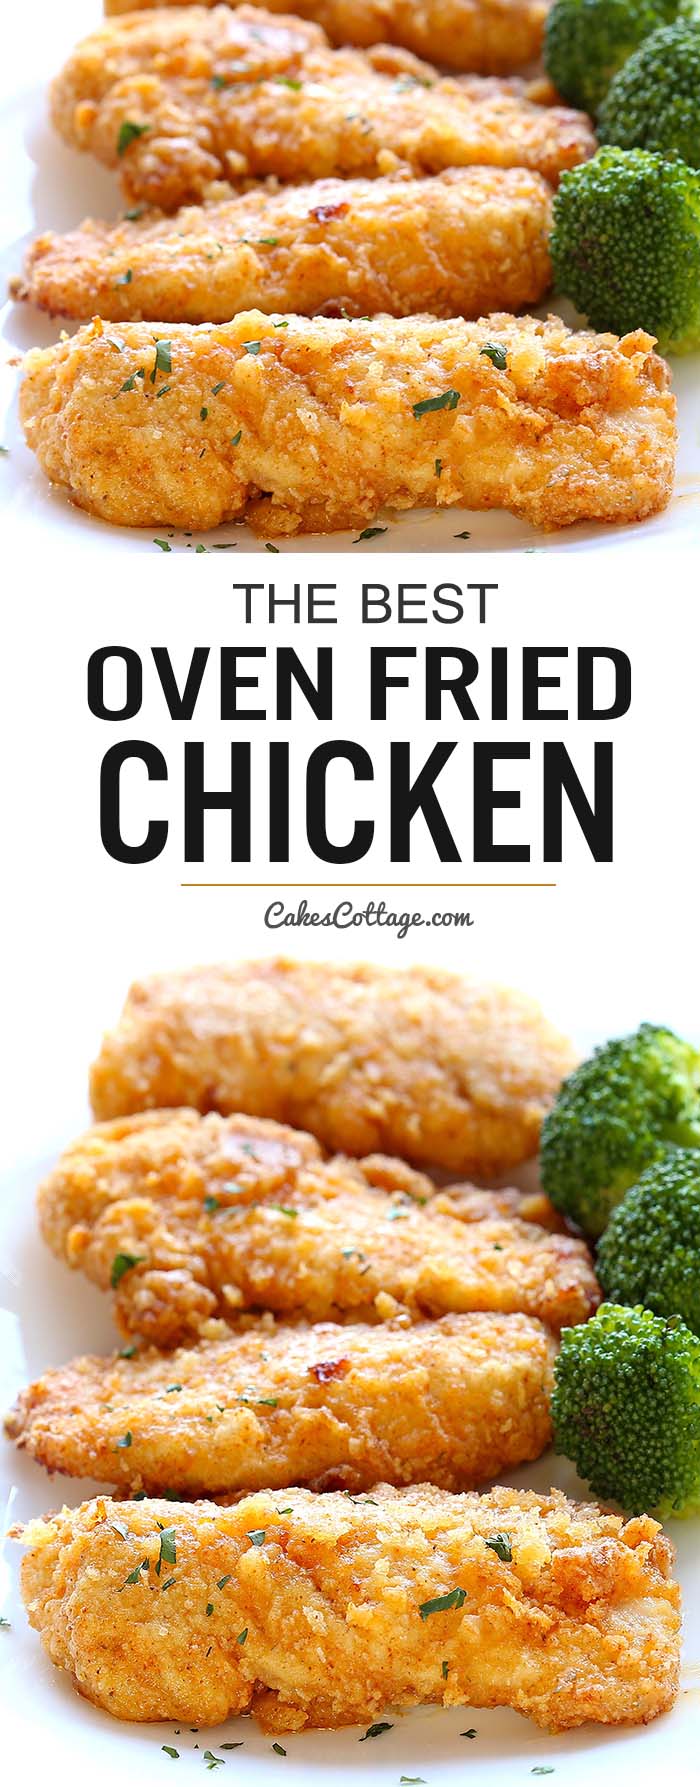 The best oven fried chicken - Crispy on the outside and tender on the inside, and baked right in the oven for easy cleanup.